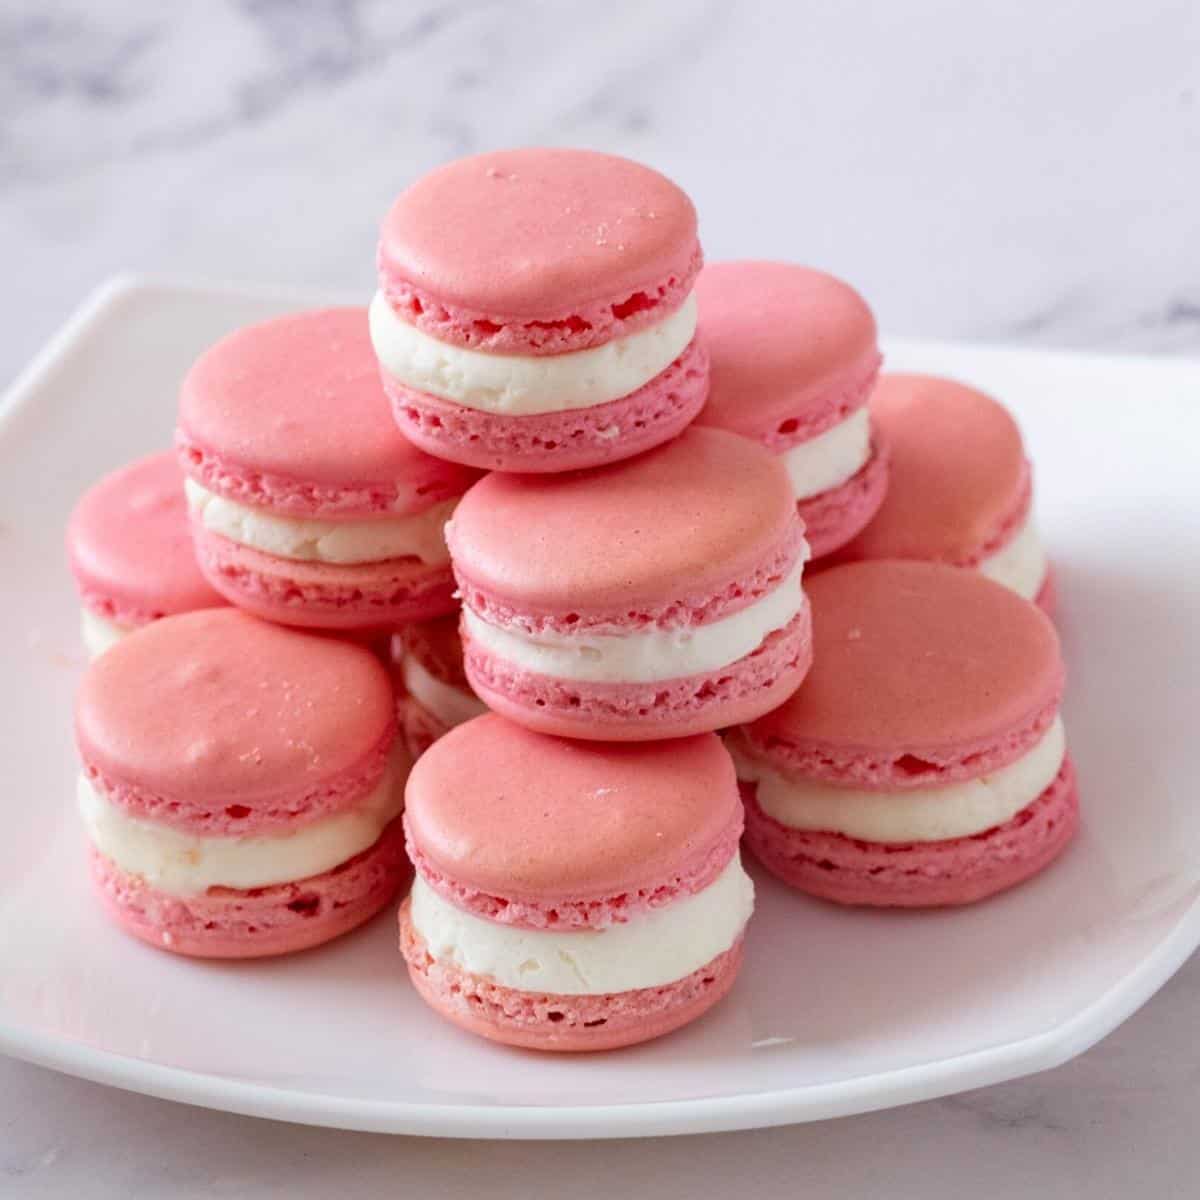 A stack of strawberry pink french macarons.